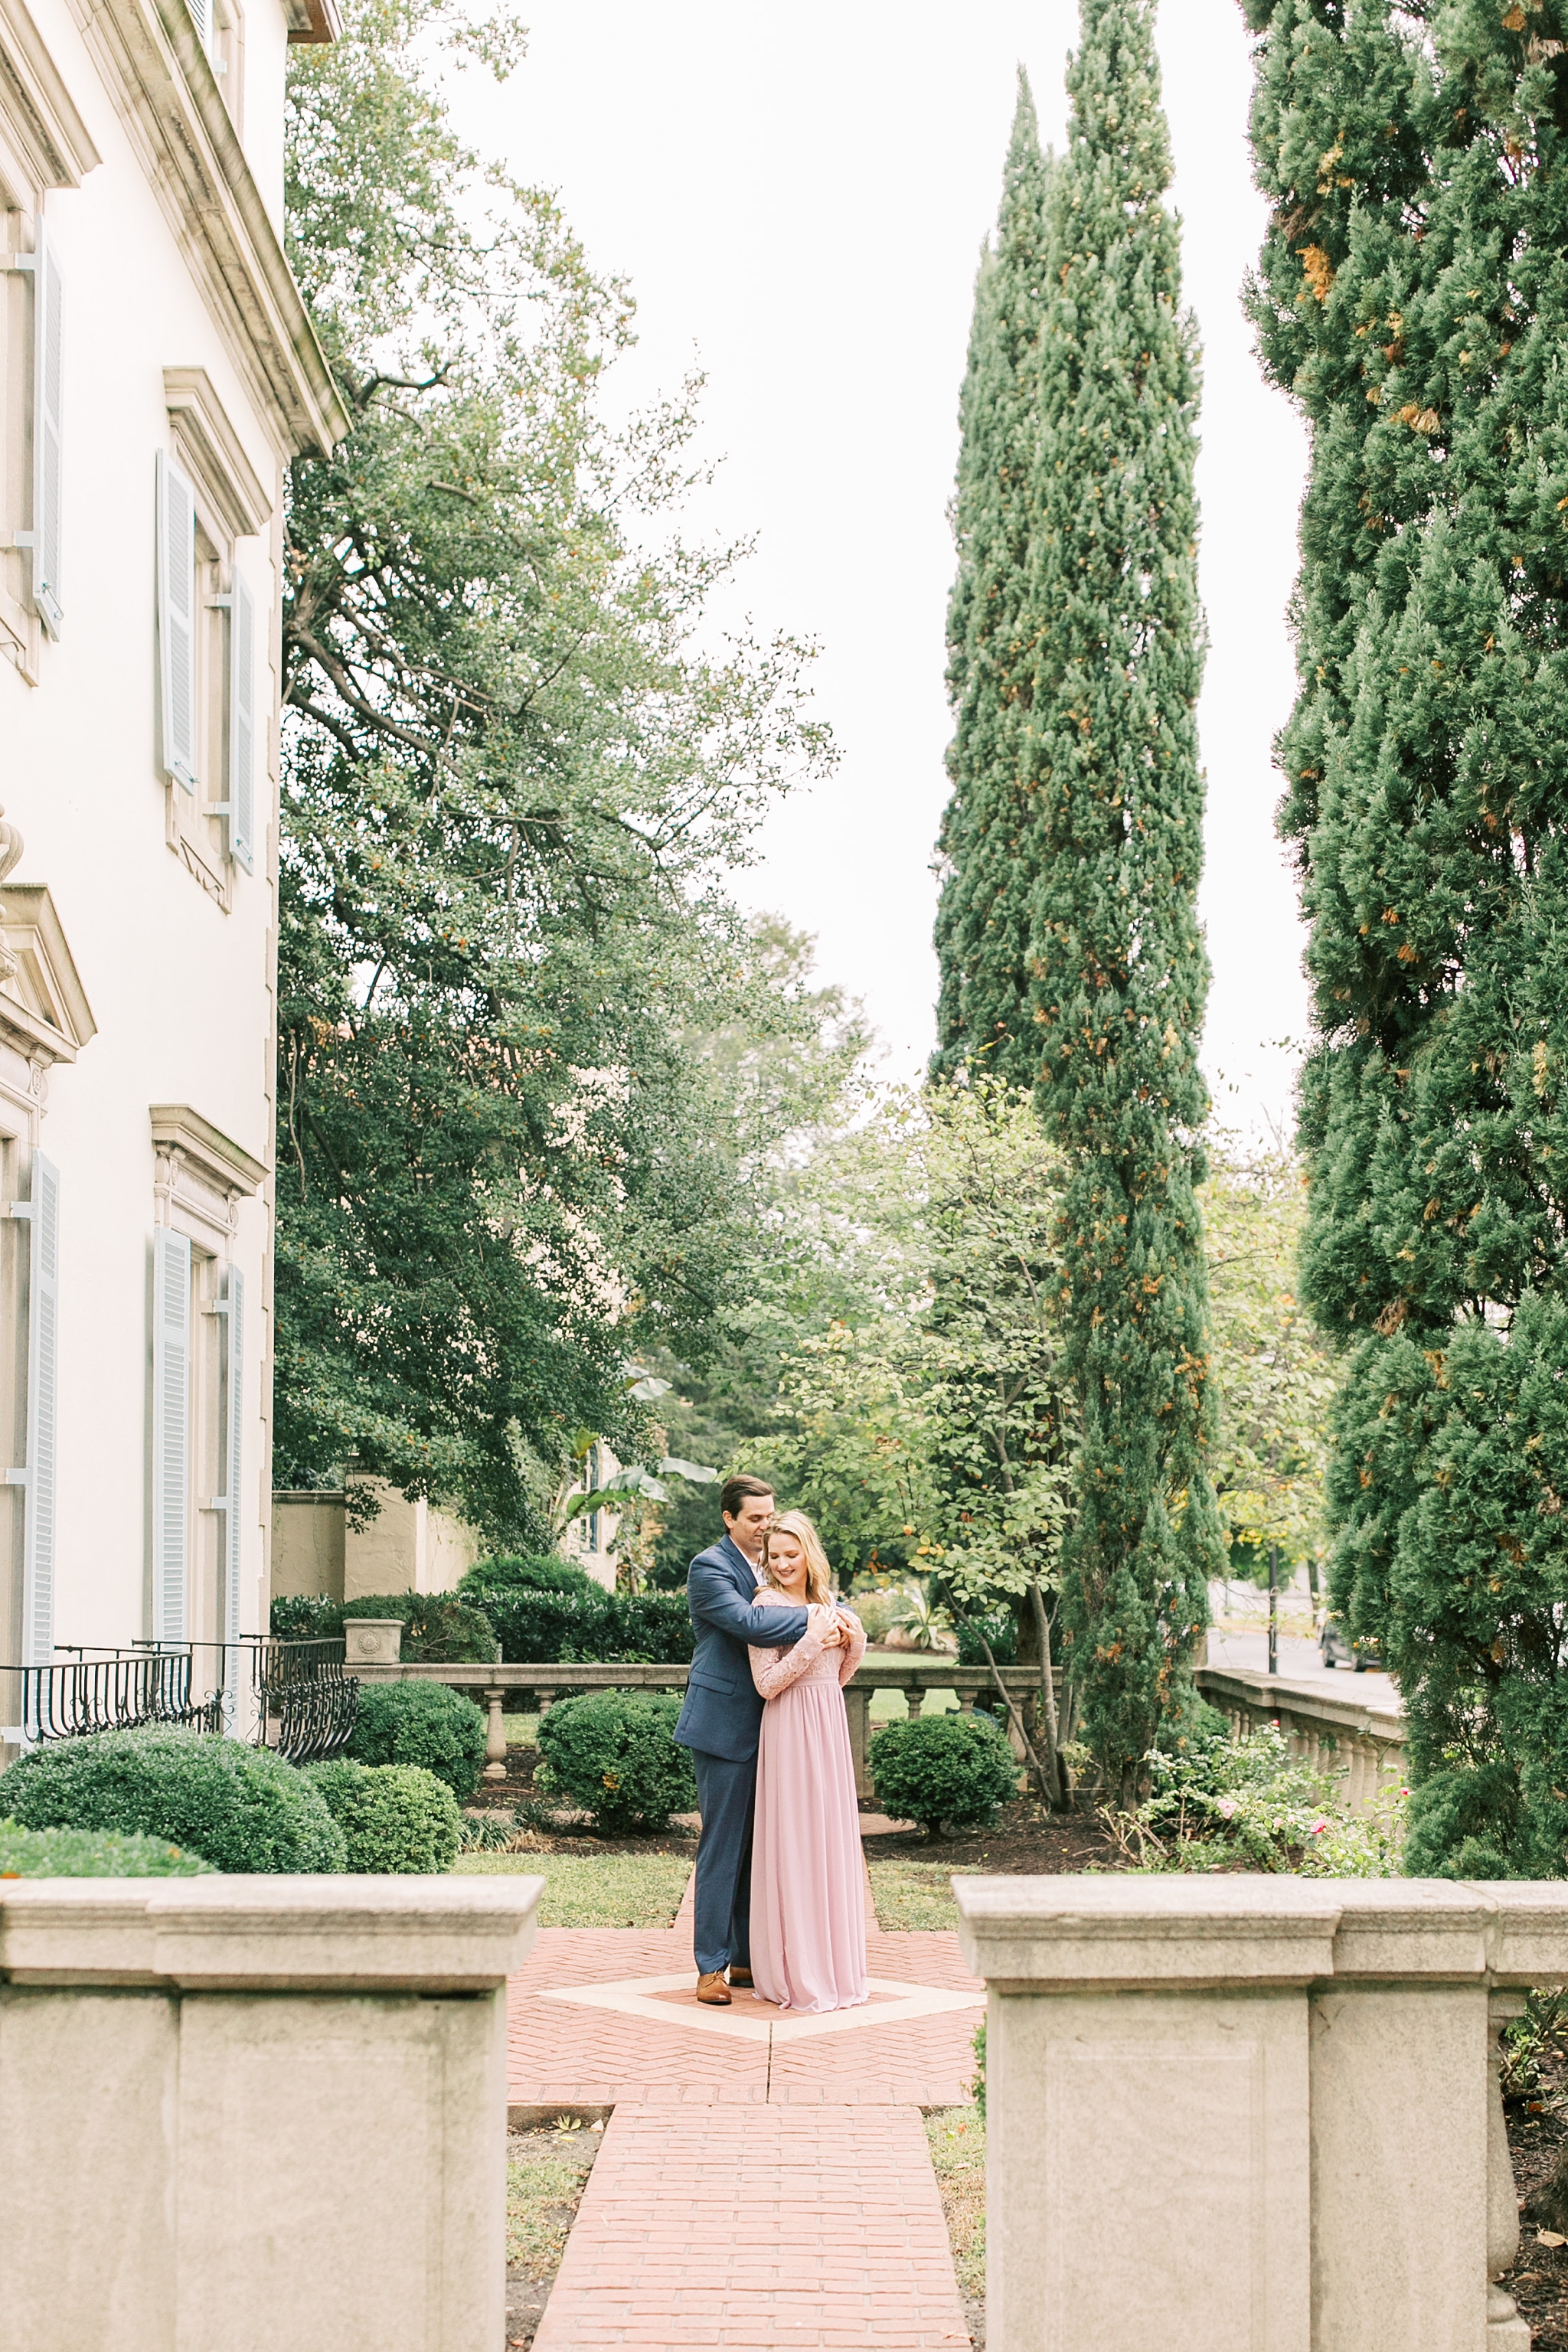 A stunning fall engagement session on Monument Ave and Byrd Park in Richmond, VA